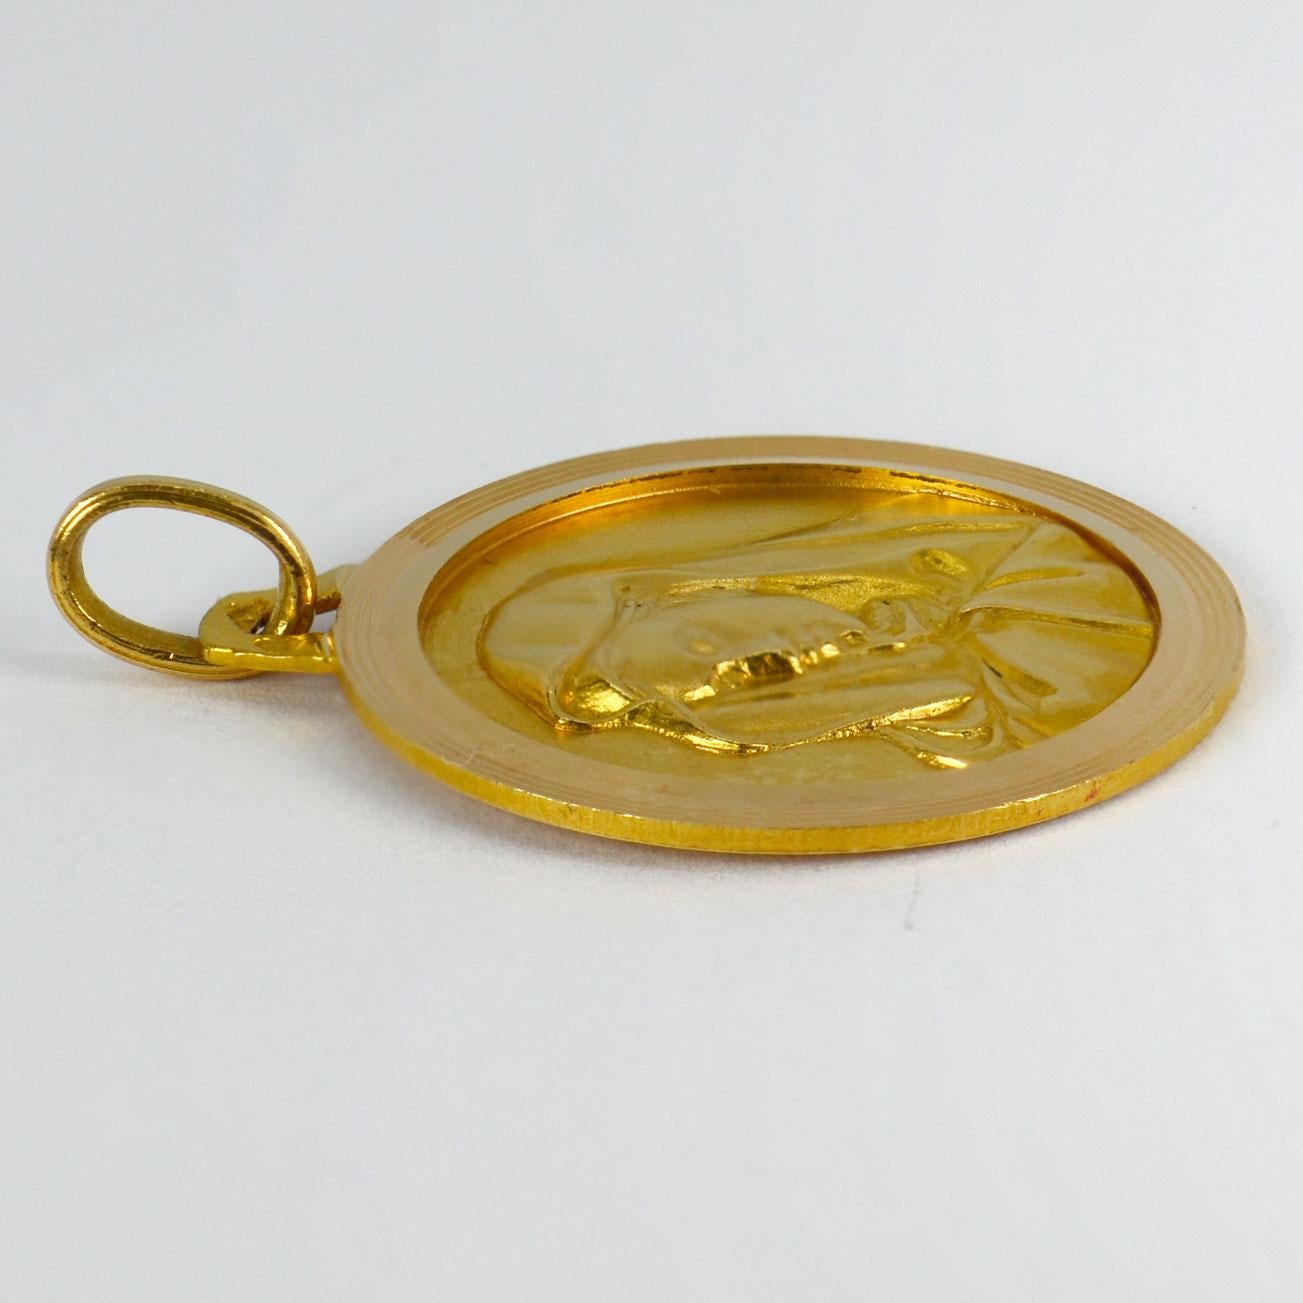 mother mary gold pendant